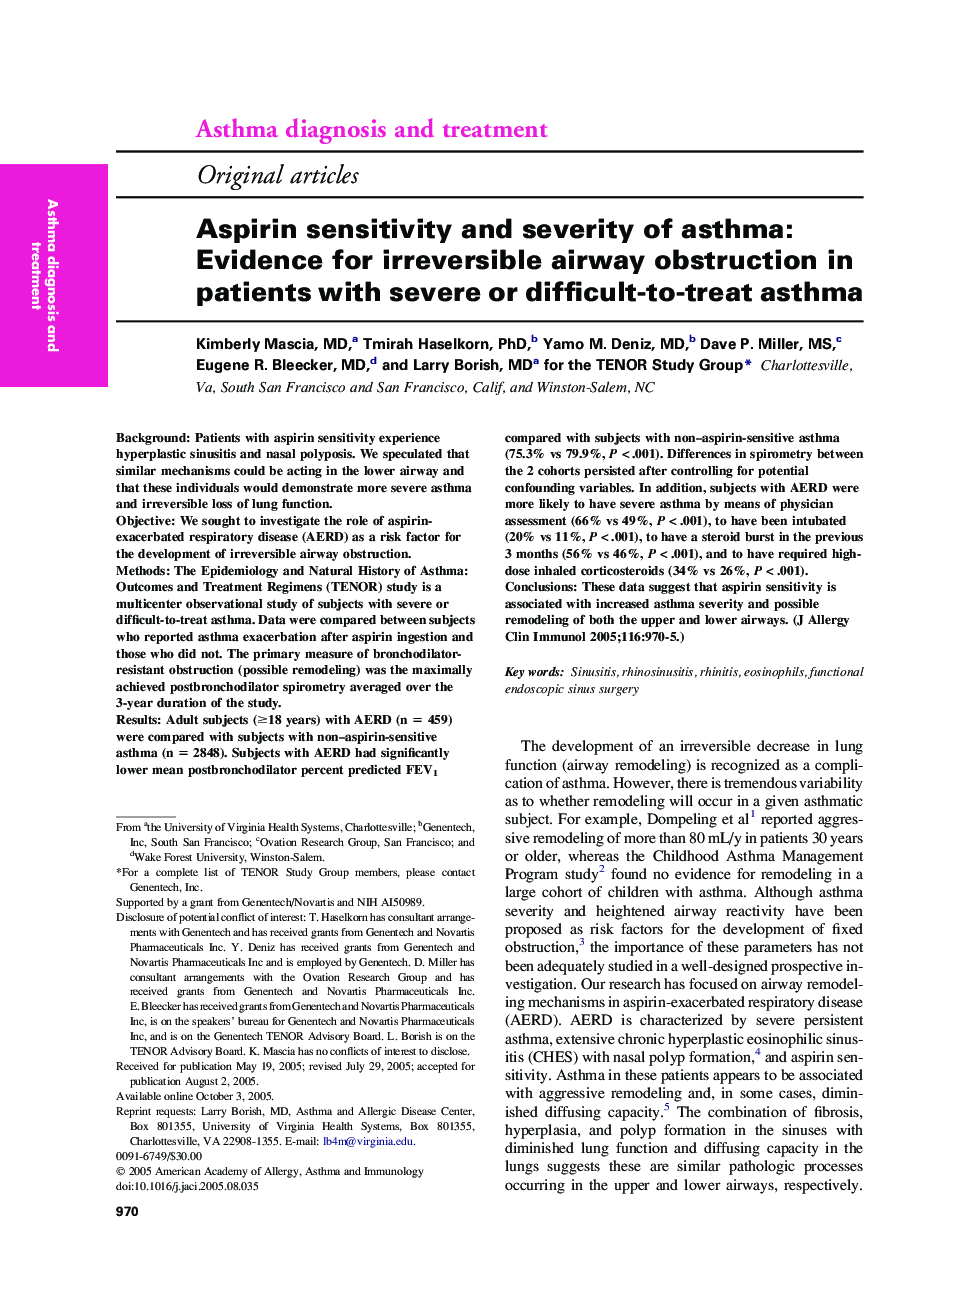 Aspirin sensitivity and severity of asthma: Evidence for irreversible airway obstruction in patients with severe or difficult-to-treat asthma